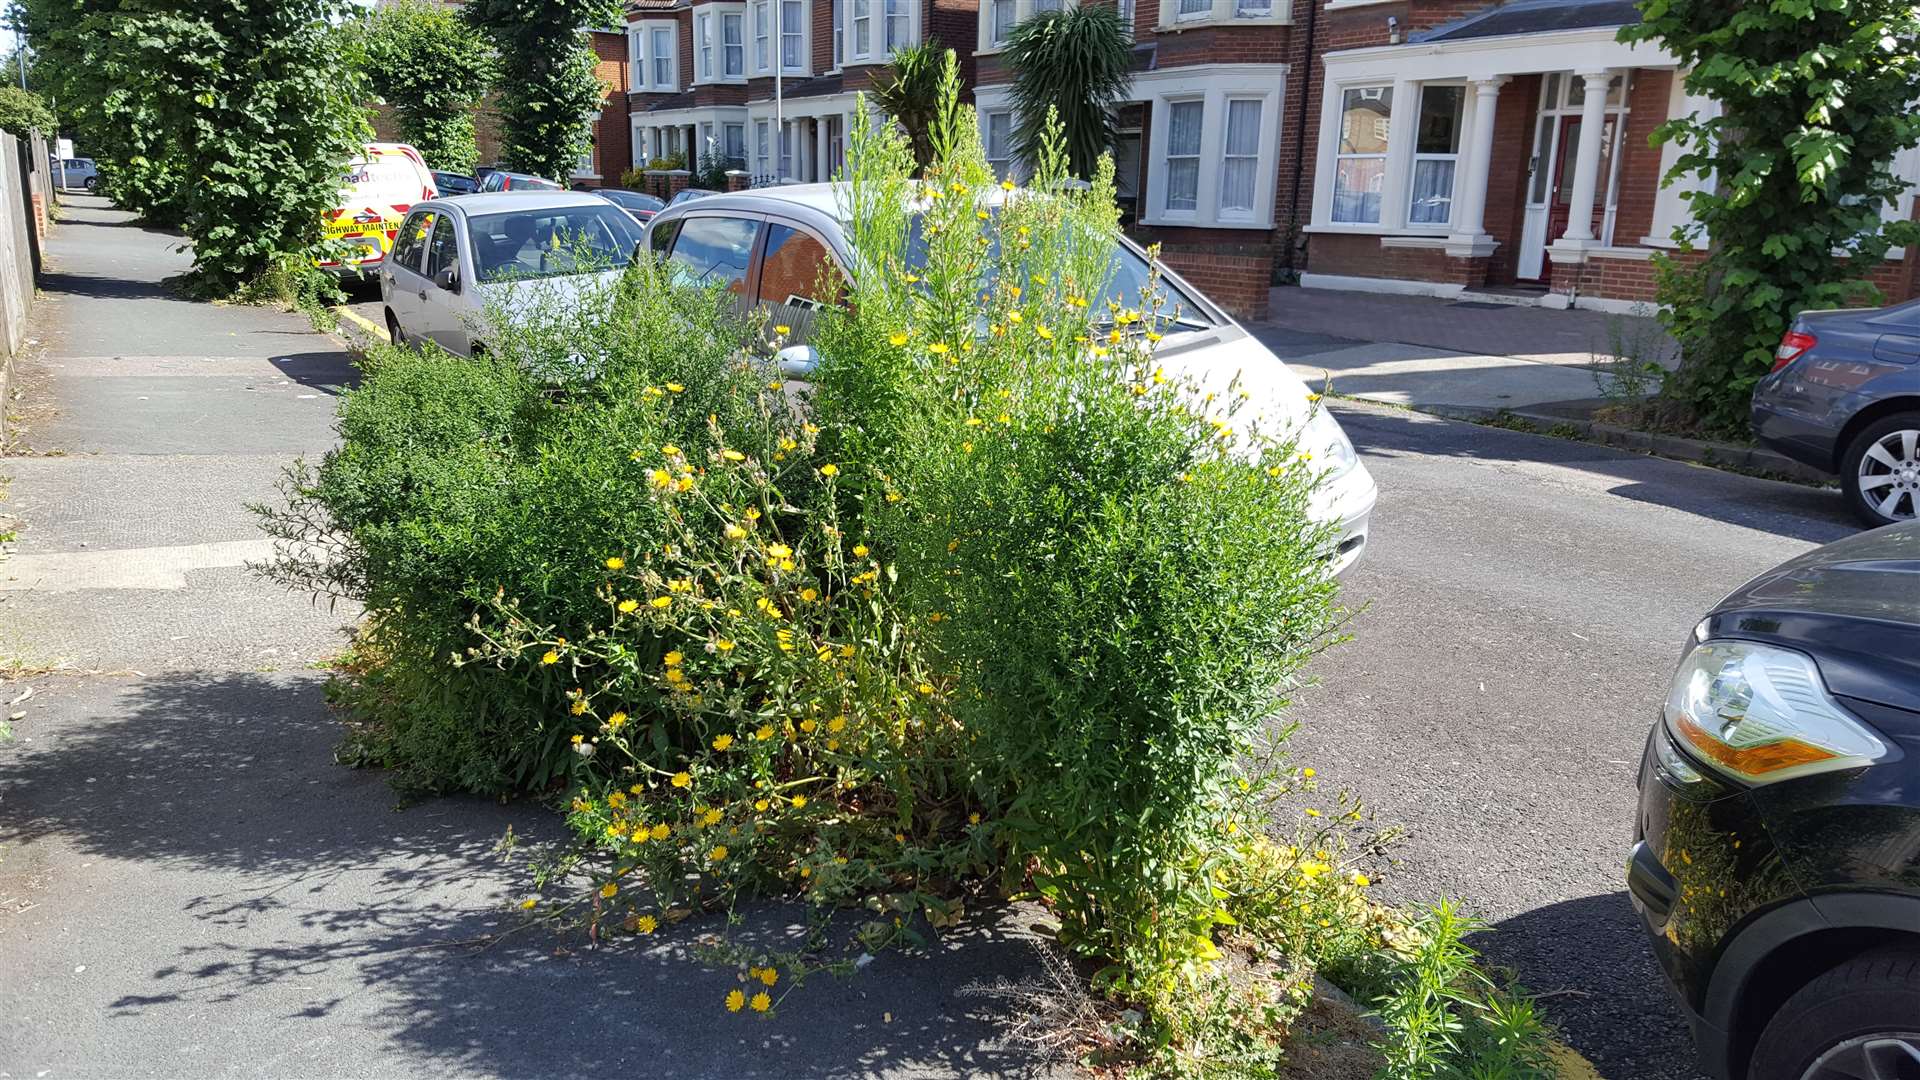 Trees and weeds were allowed to grow out of control in The Avenue, Gravesend